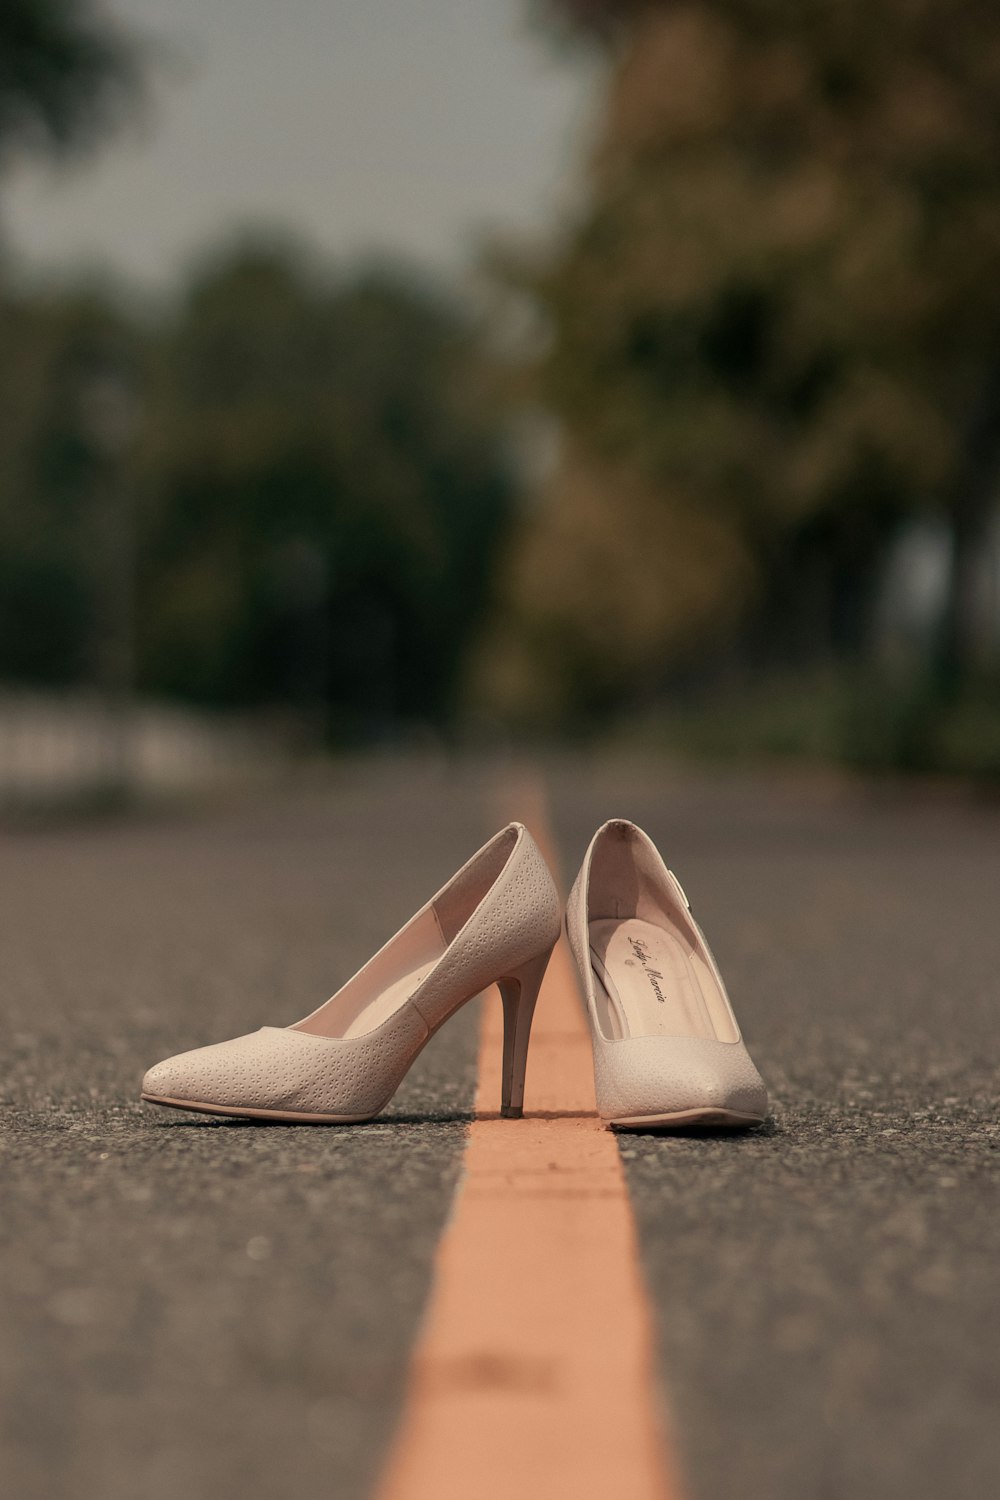 pair of white pumps on road